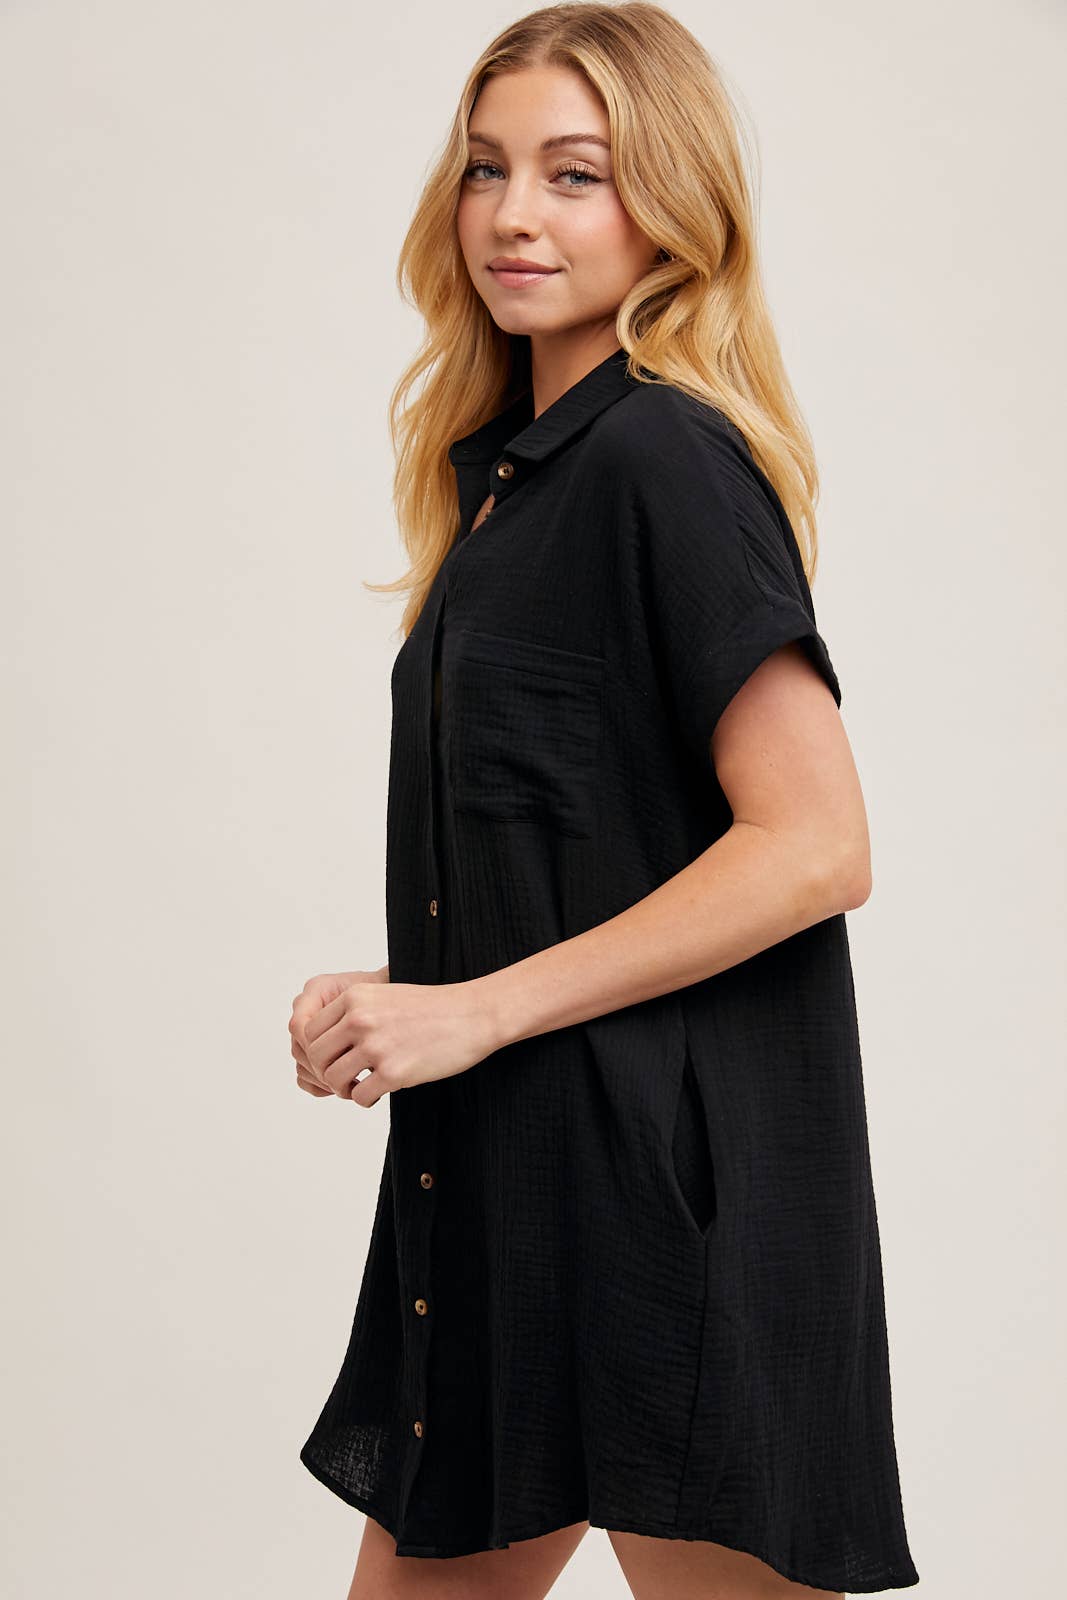 Betsy - BUTTON UP SHIRT DRESS WITH POCKET - Bluivy